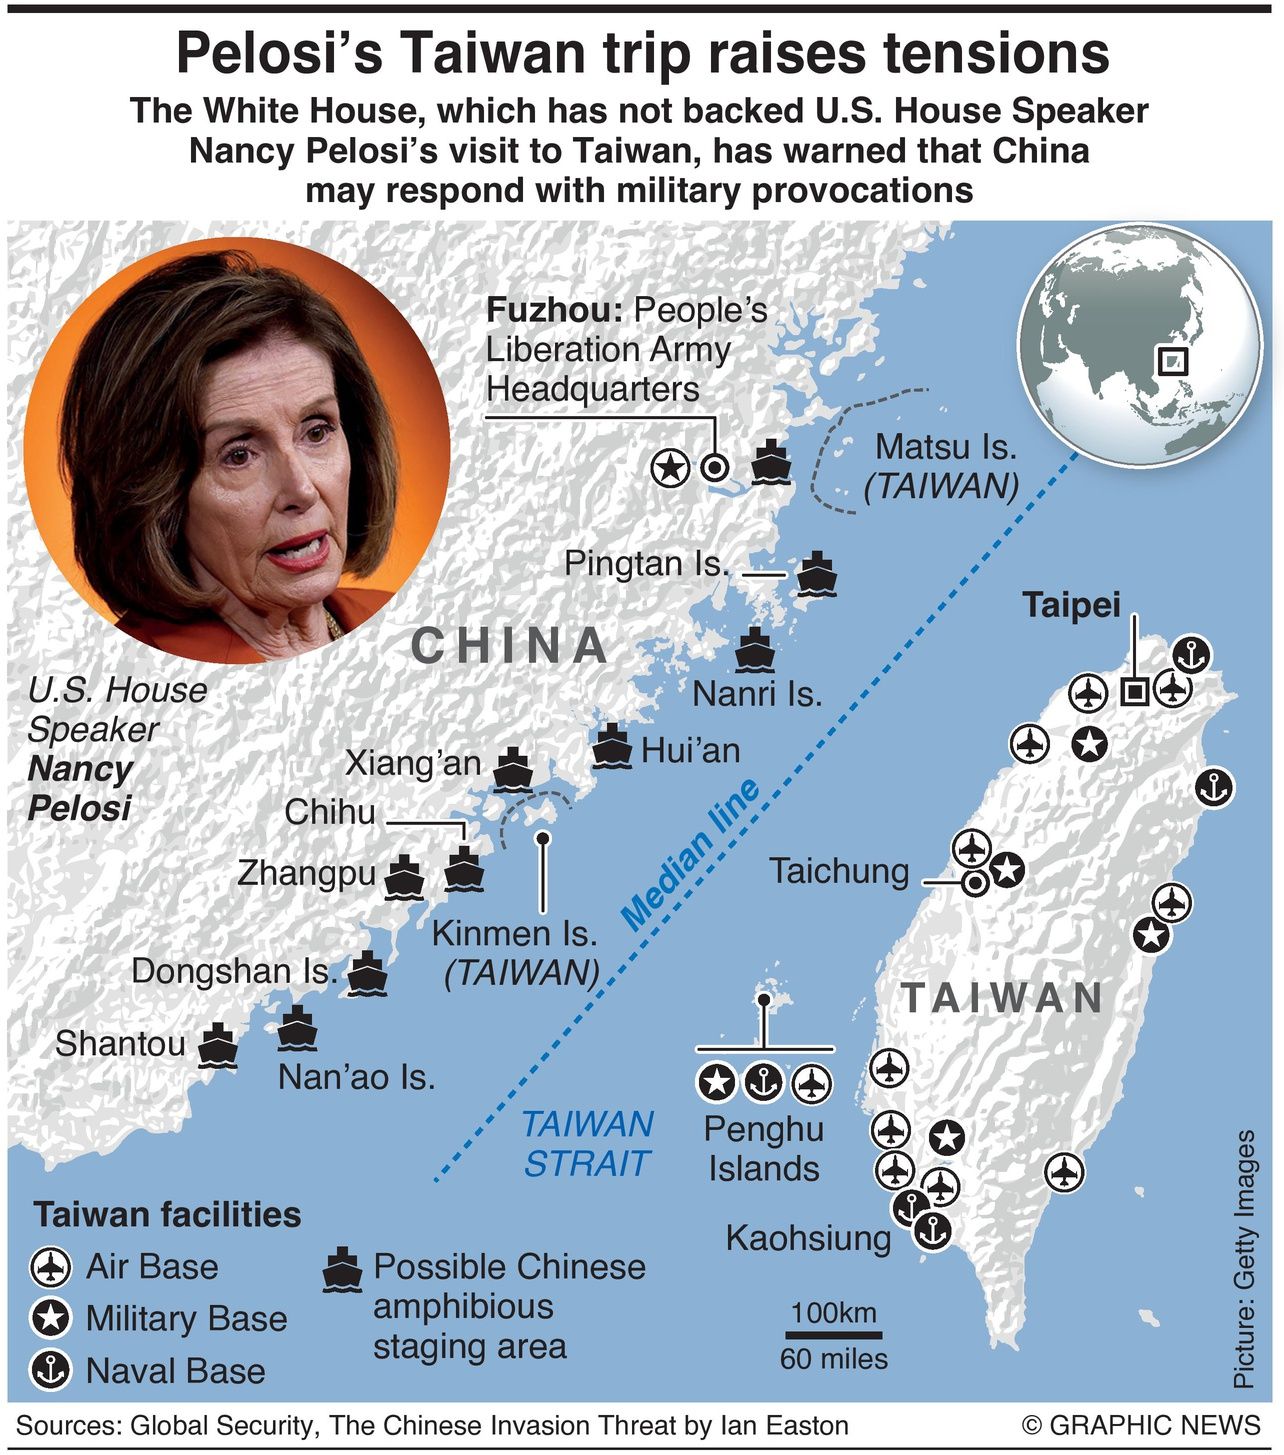 Locations of Taiwan Military facilities and Chinese amphibious staging areas upon Nancy Pelosi visit